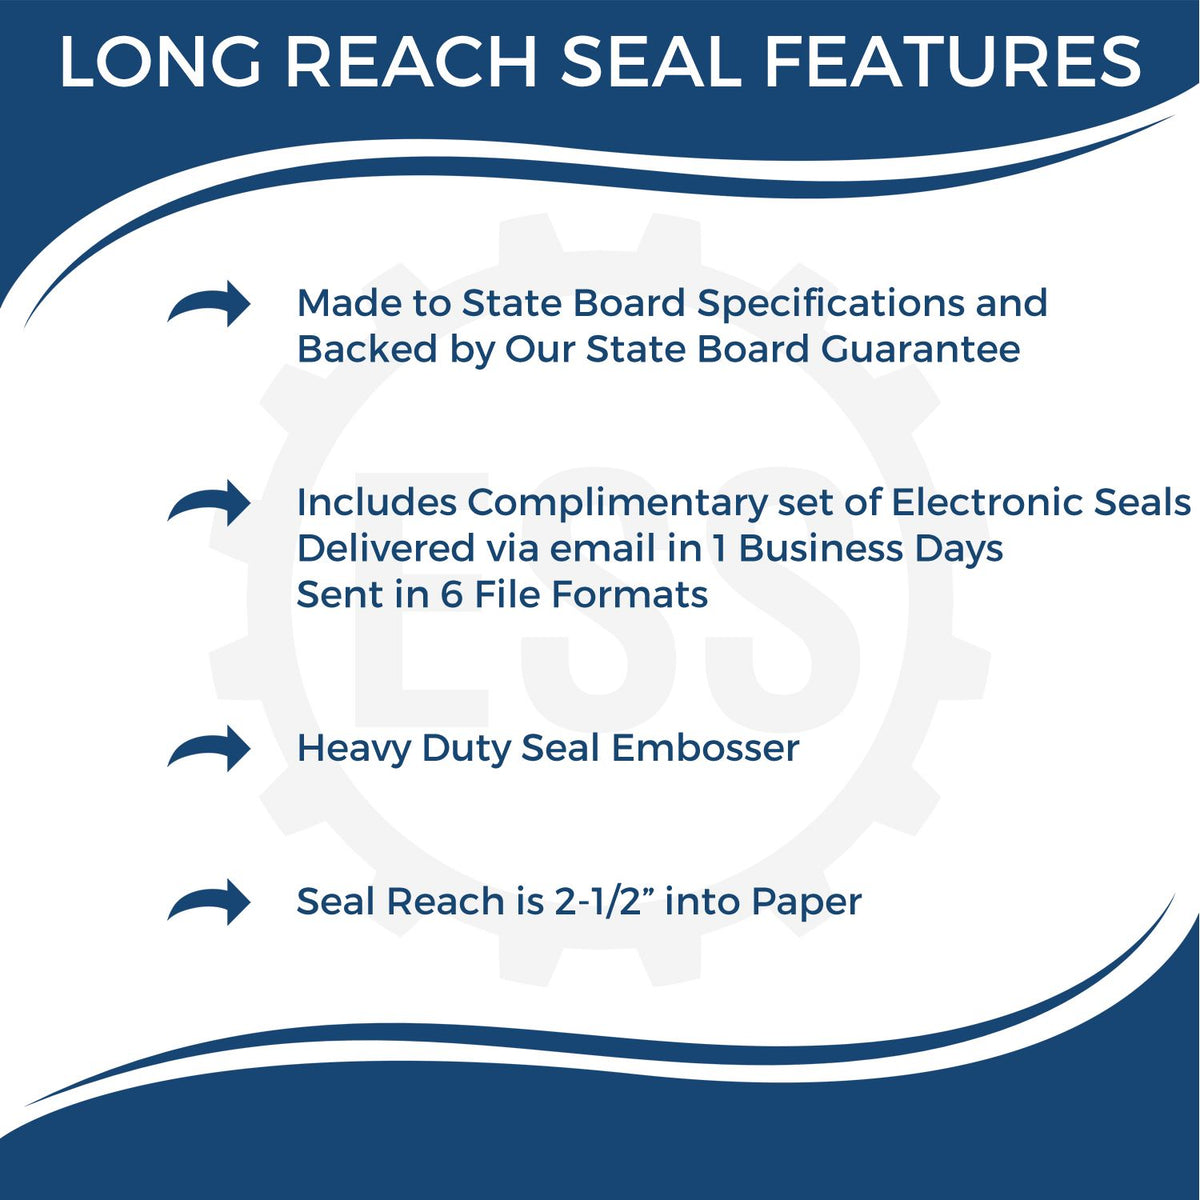 A picture of an infographic highlighting the selling points for the Long Reach Florida Land Surveyor Seal